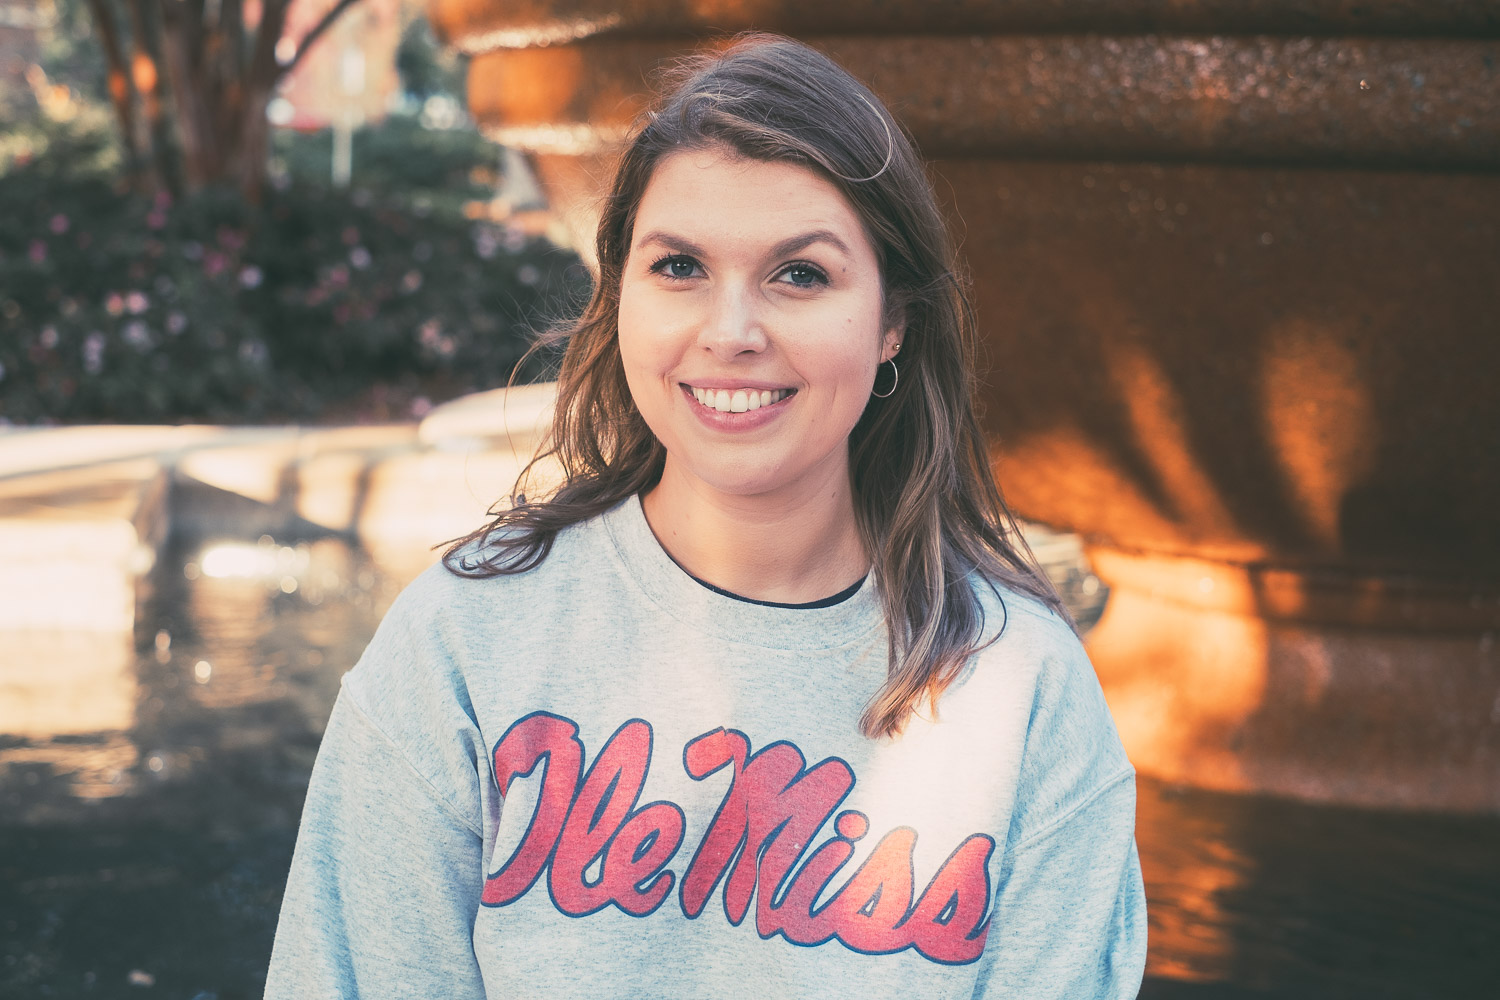 Outstanding Ole Miss Graduation Portraits Oxford, MS